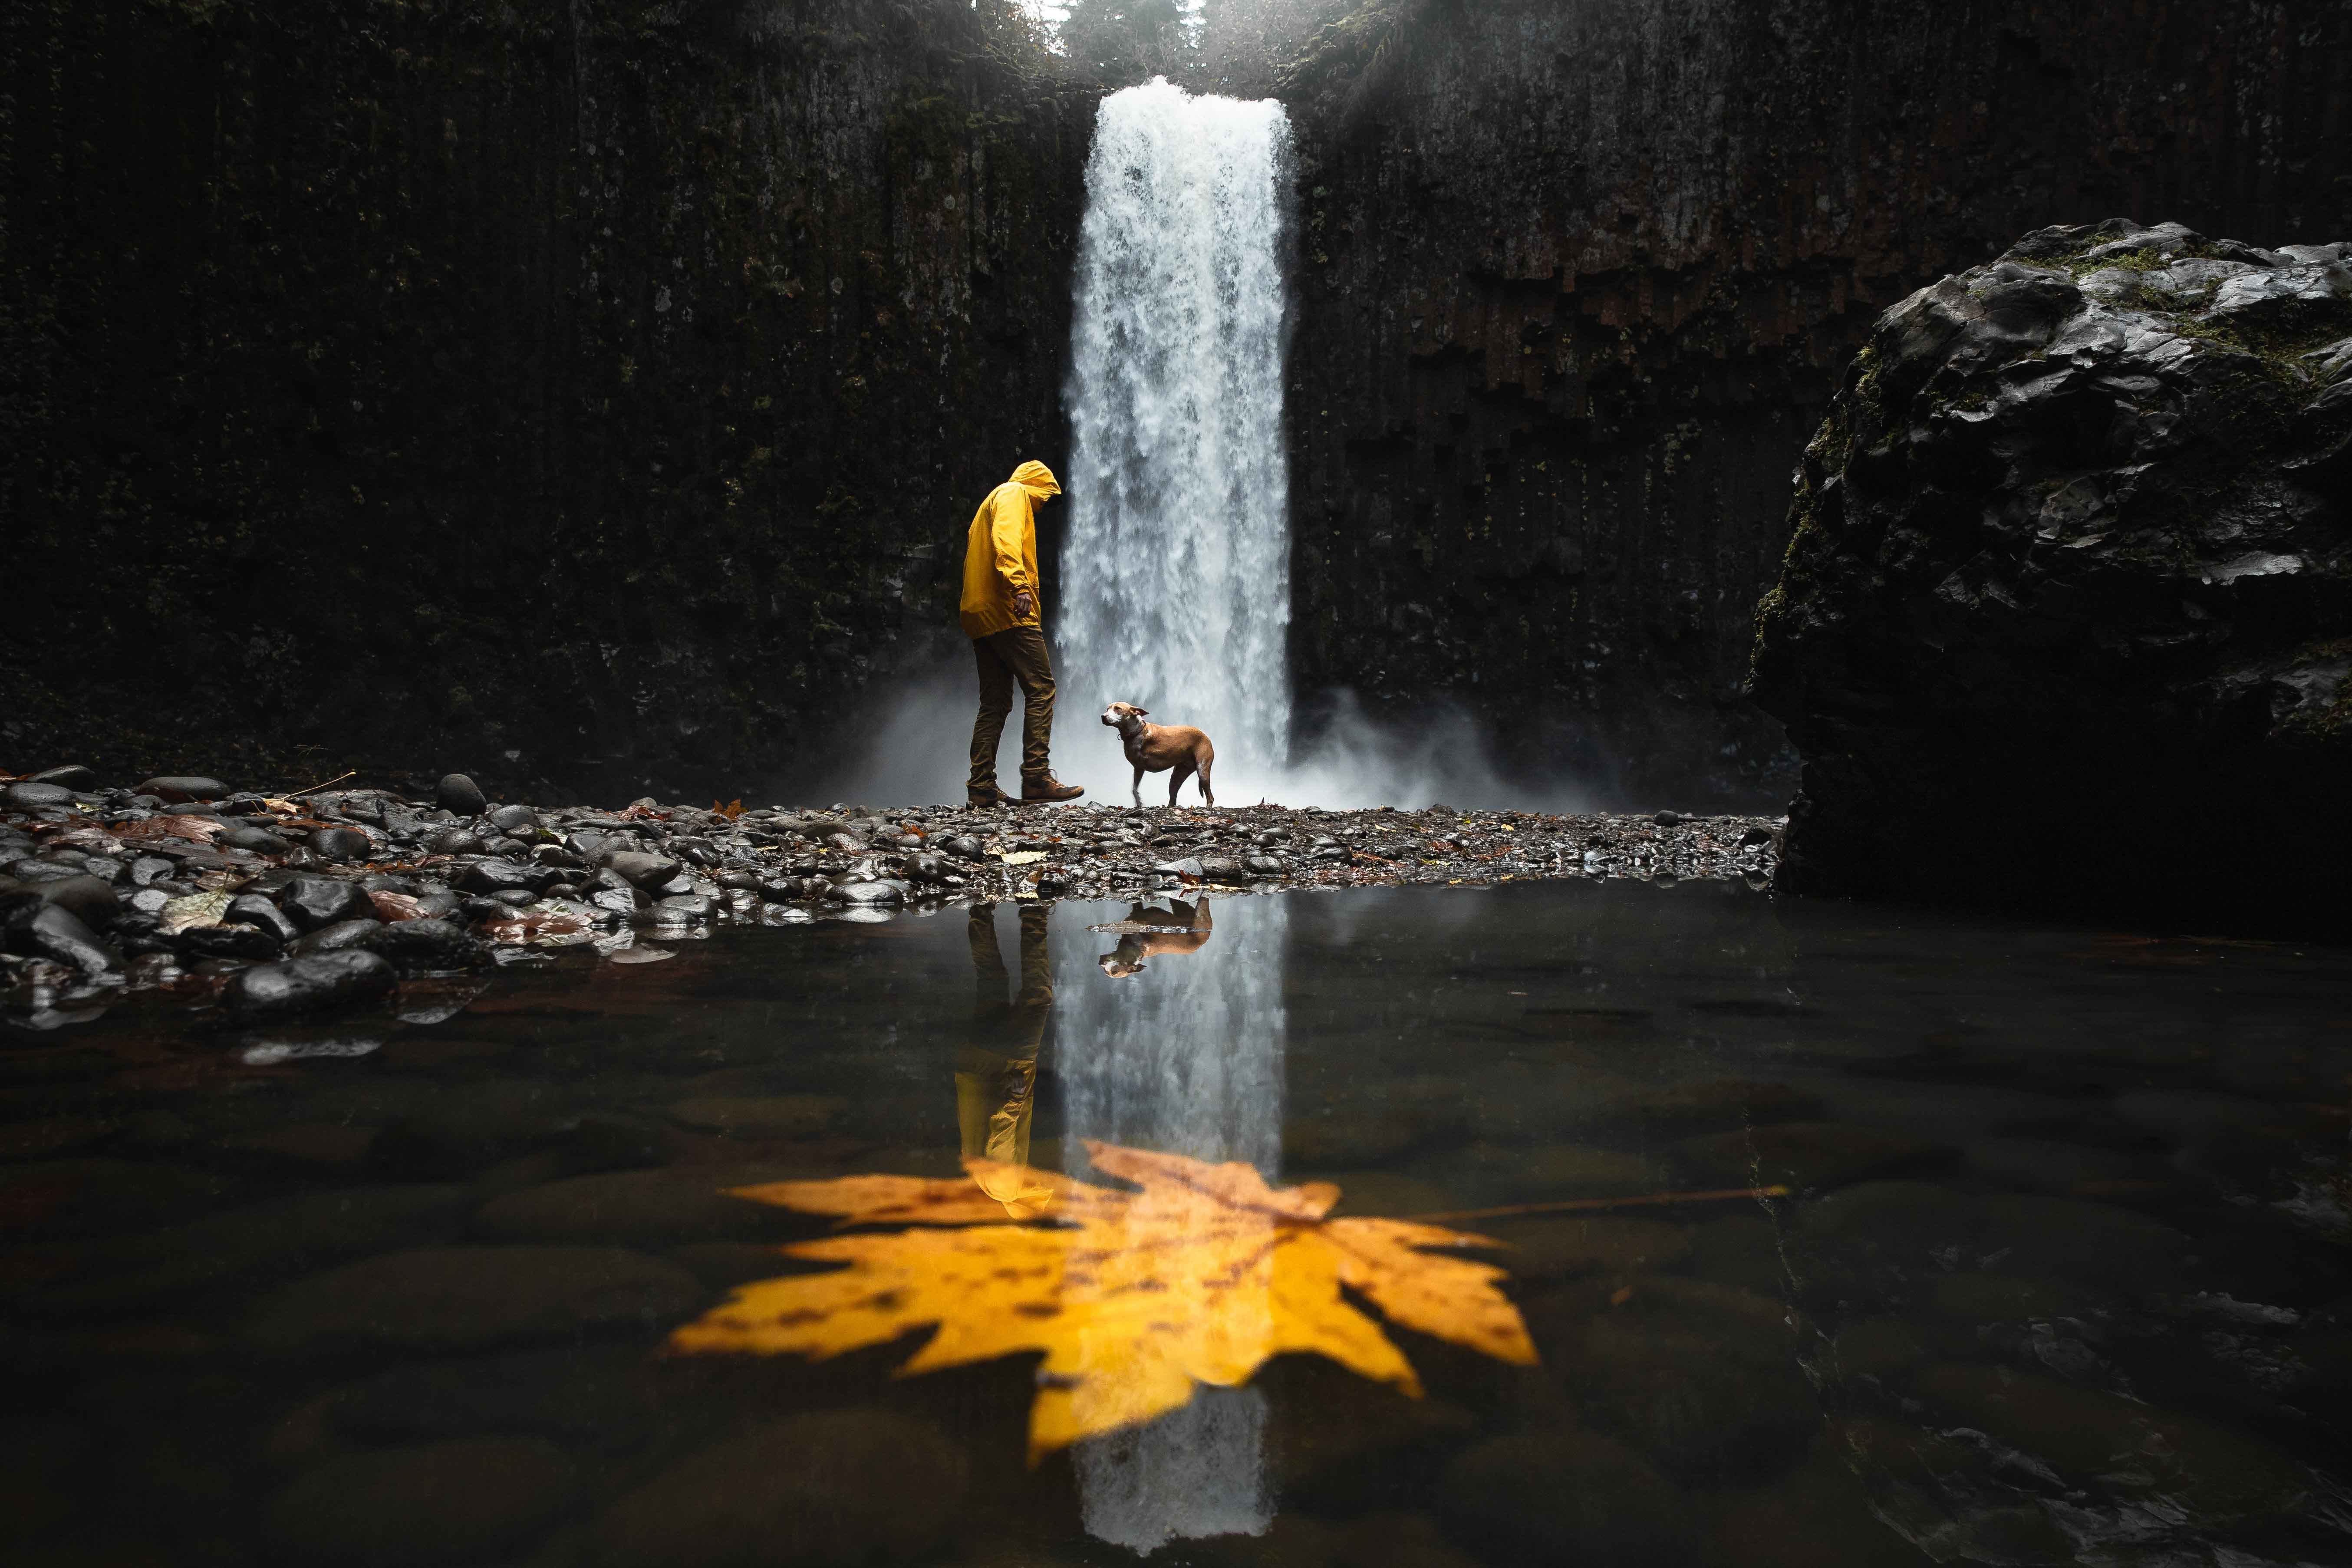 A person wearing a yellow jacket stands with a dog at Abiqua Falls in Oregon during the fall. There is a yellow leaf in the reflection of the waterfall.